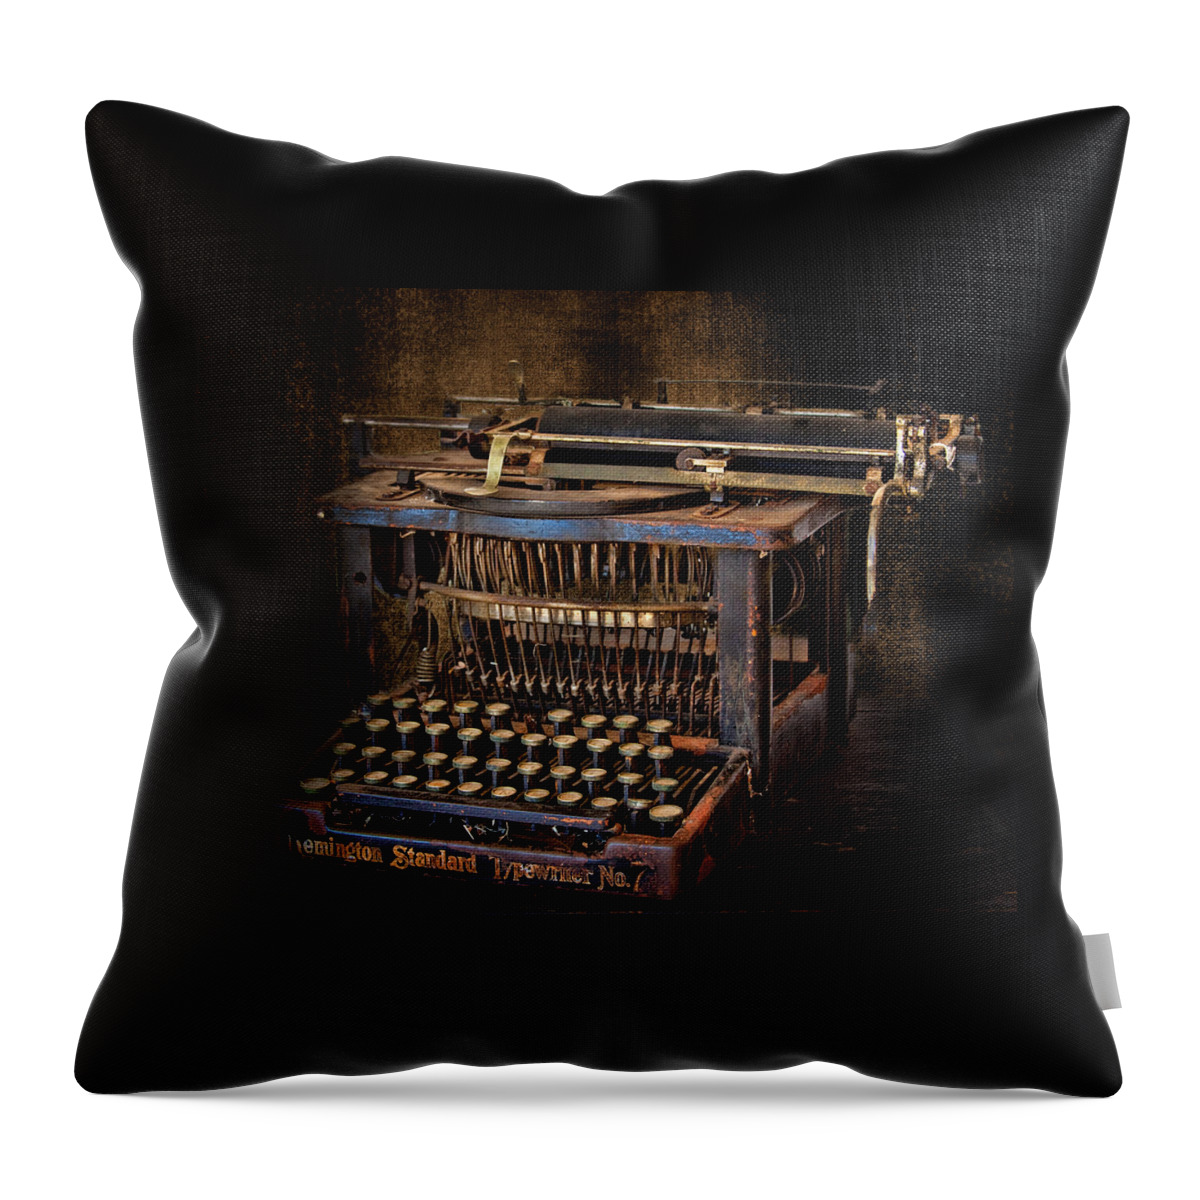 Typewriter Throw Pillow featuring the photograph Keys To Words by David and Carol Kelly